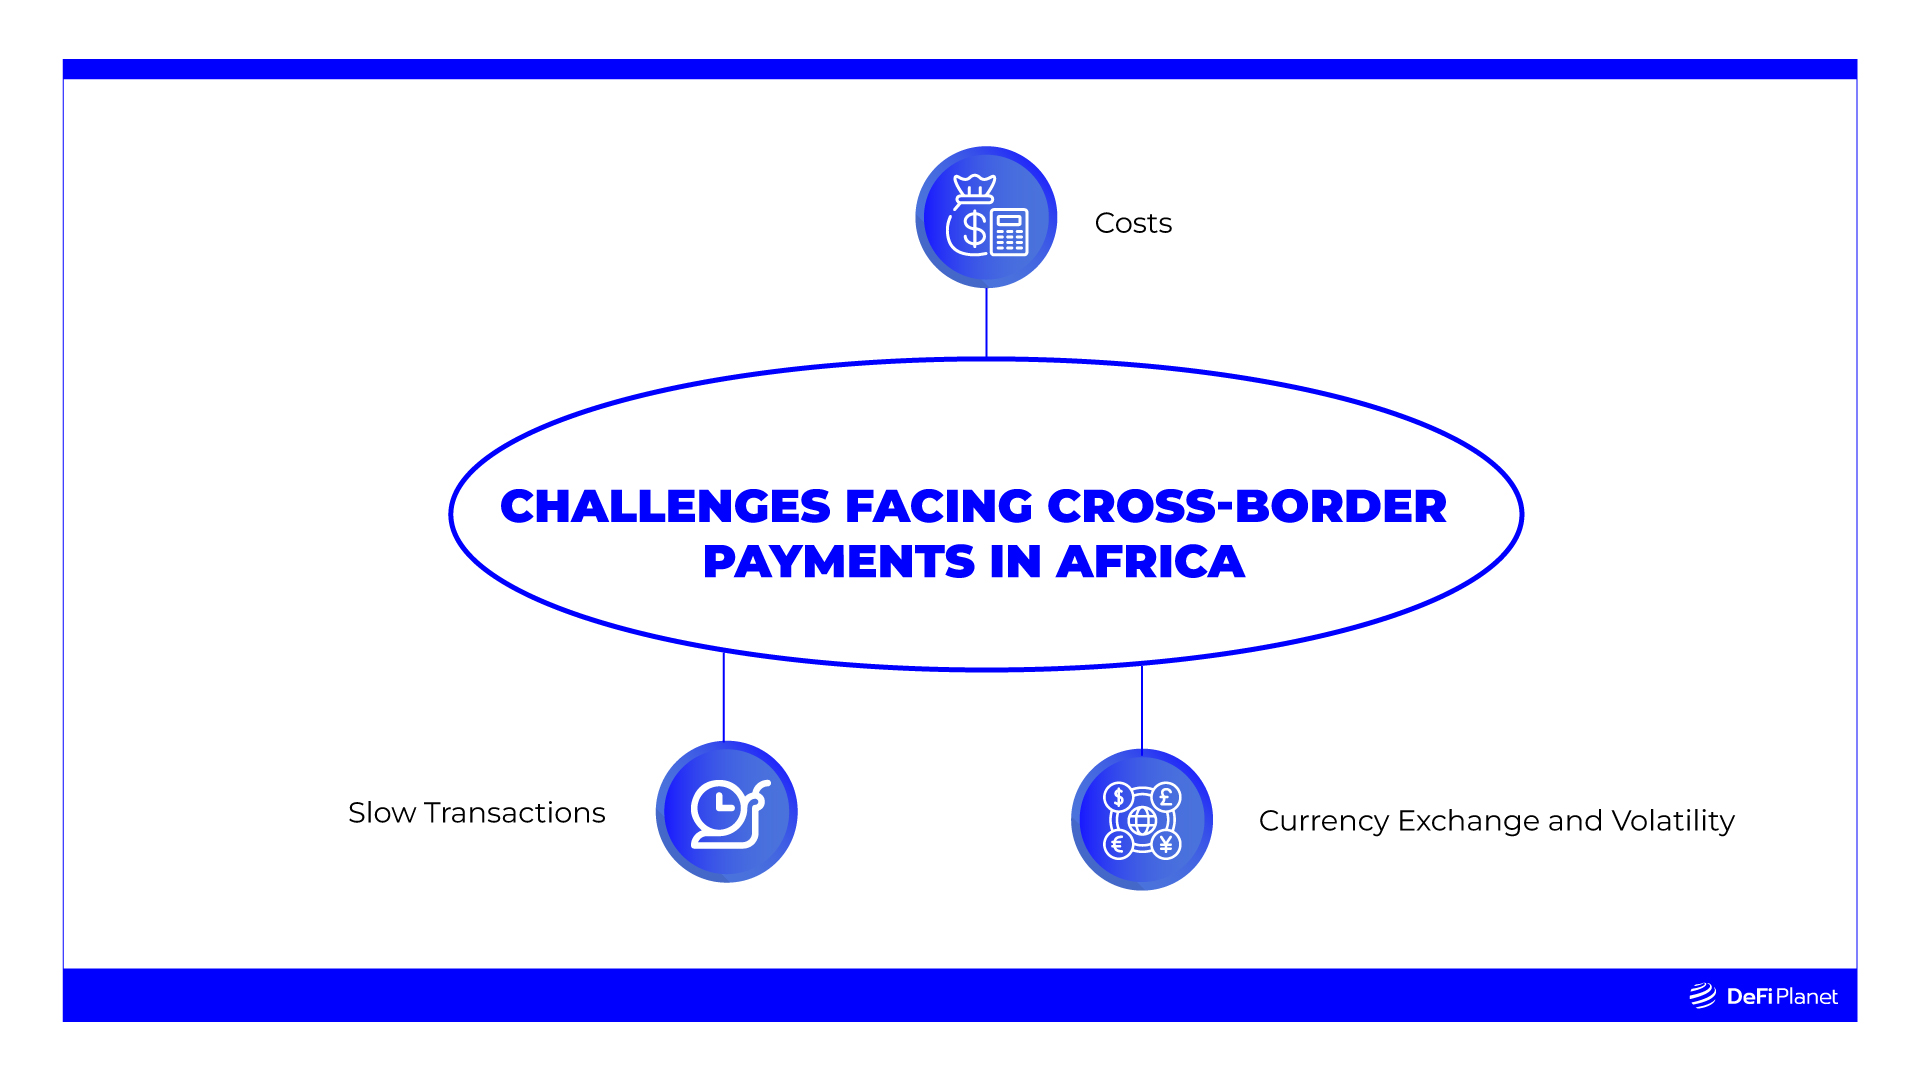 Challenges Facing Cross-Border Payments in Africa